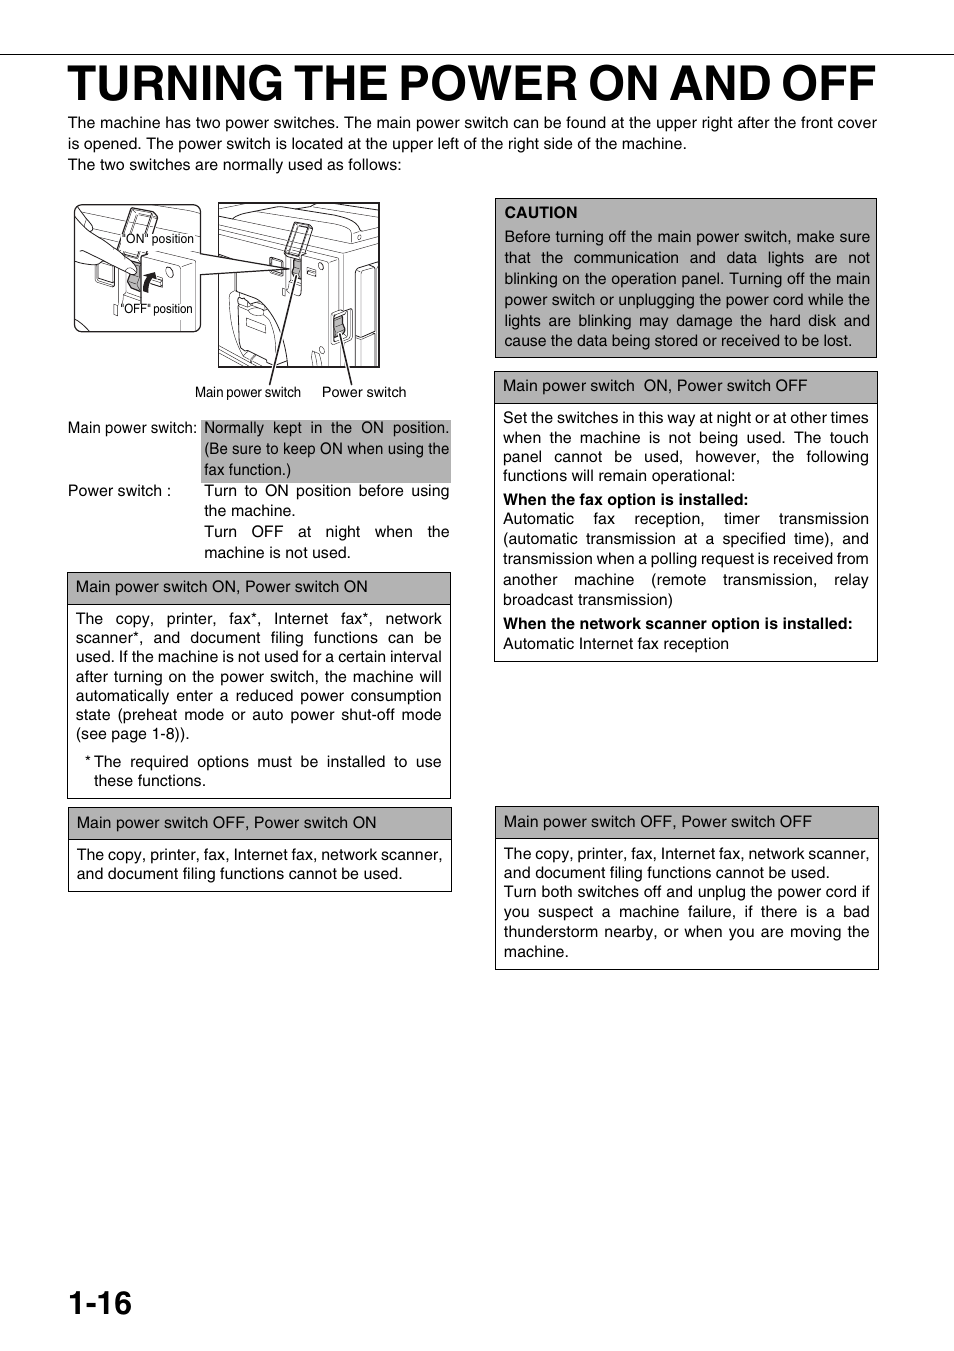 Turning the power on and off | Sharp AR-M700N User Manual | Page 26 / 172